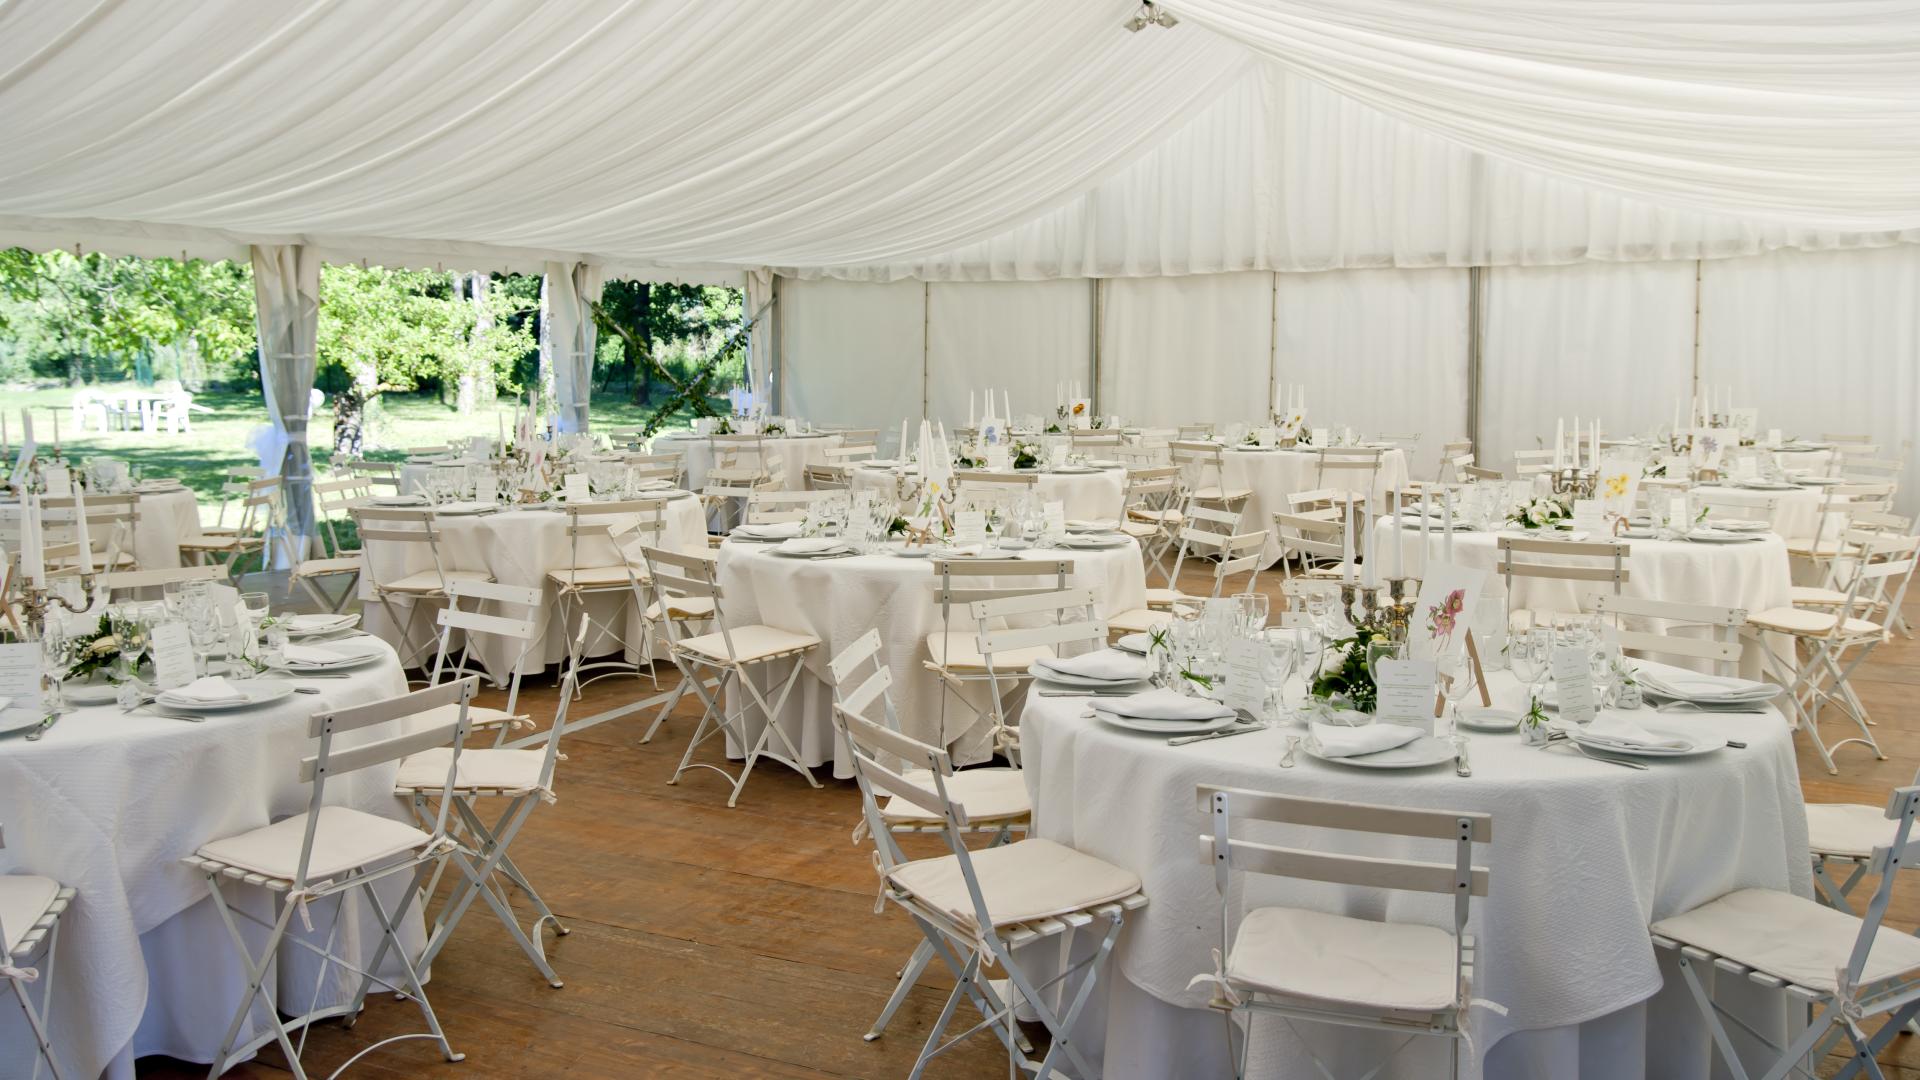 Wedding Reception Venues for Hire in Manchester